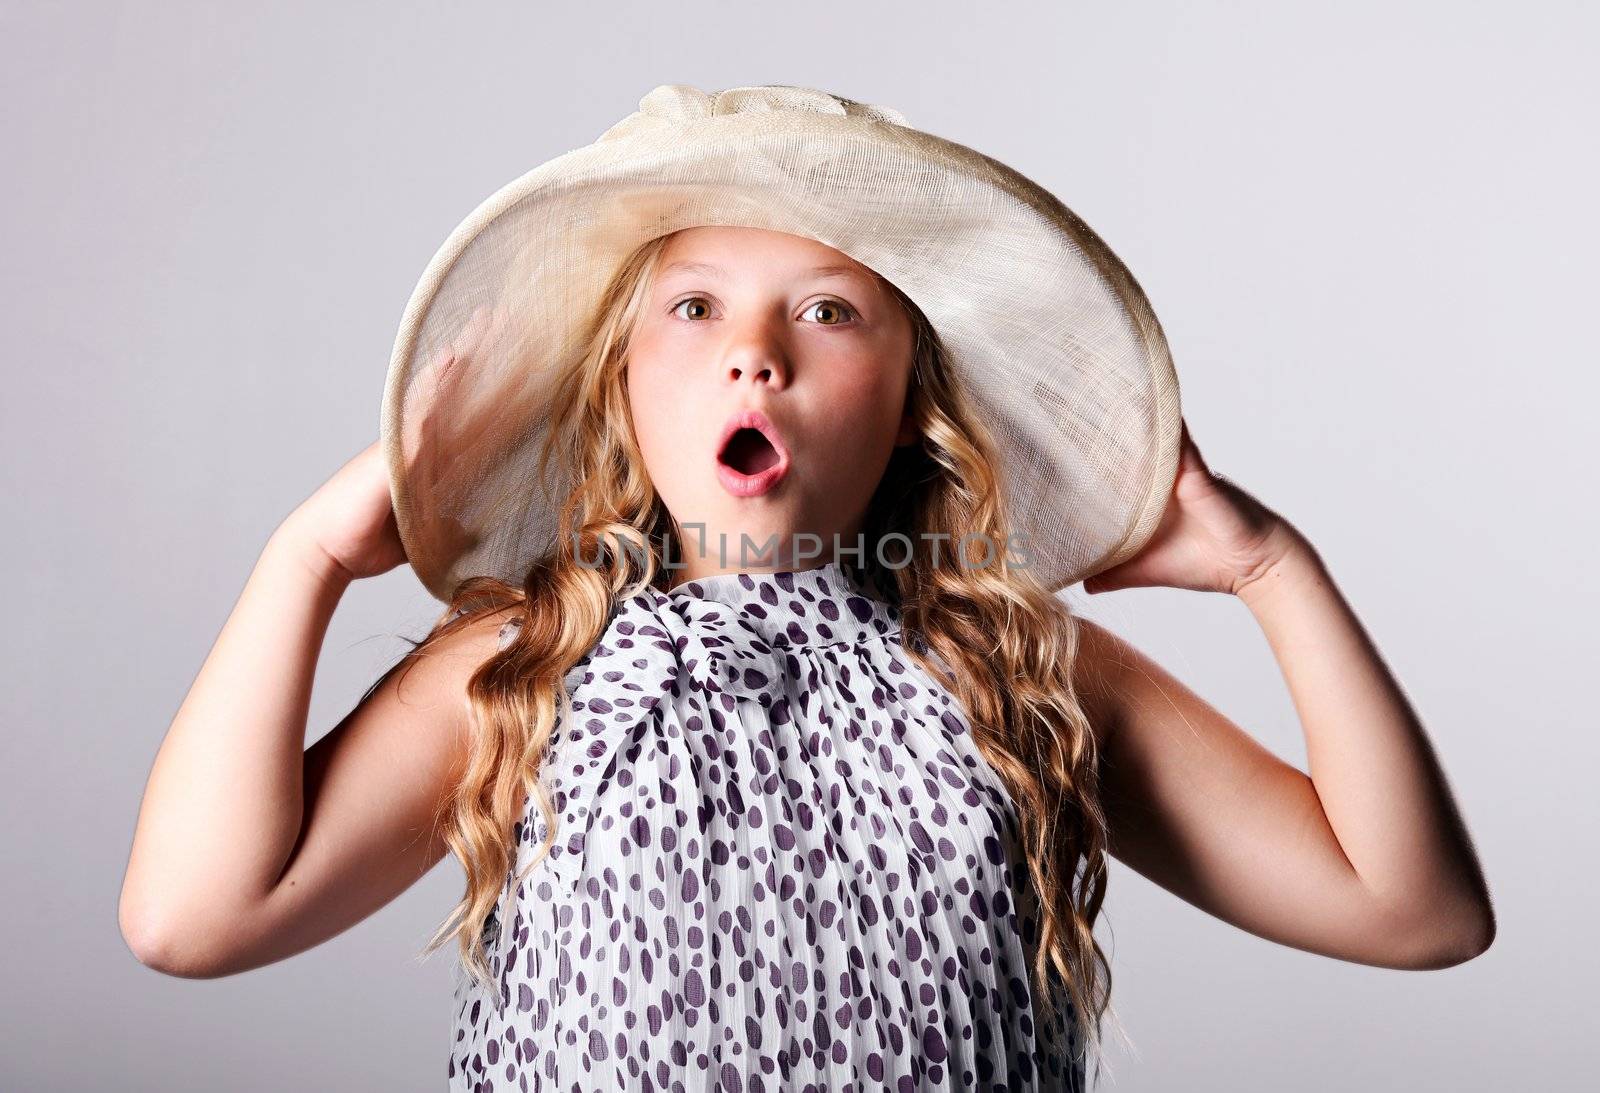 Surprised girl in summer hat over white background